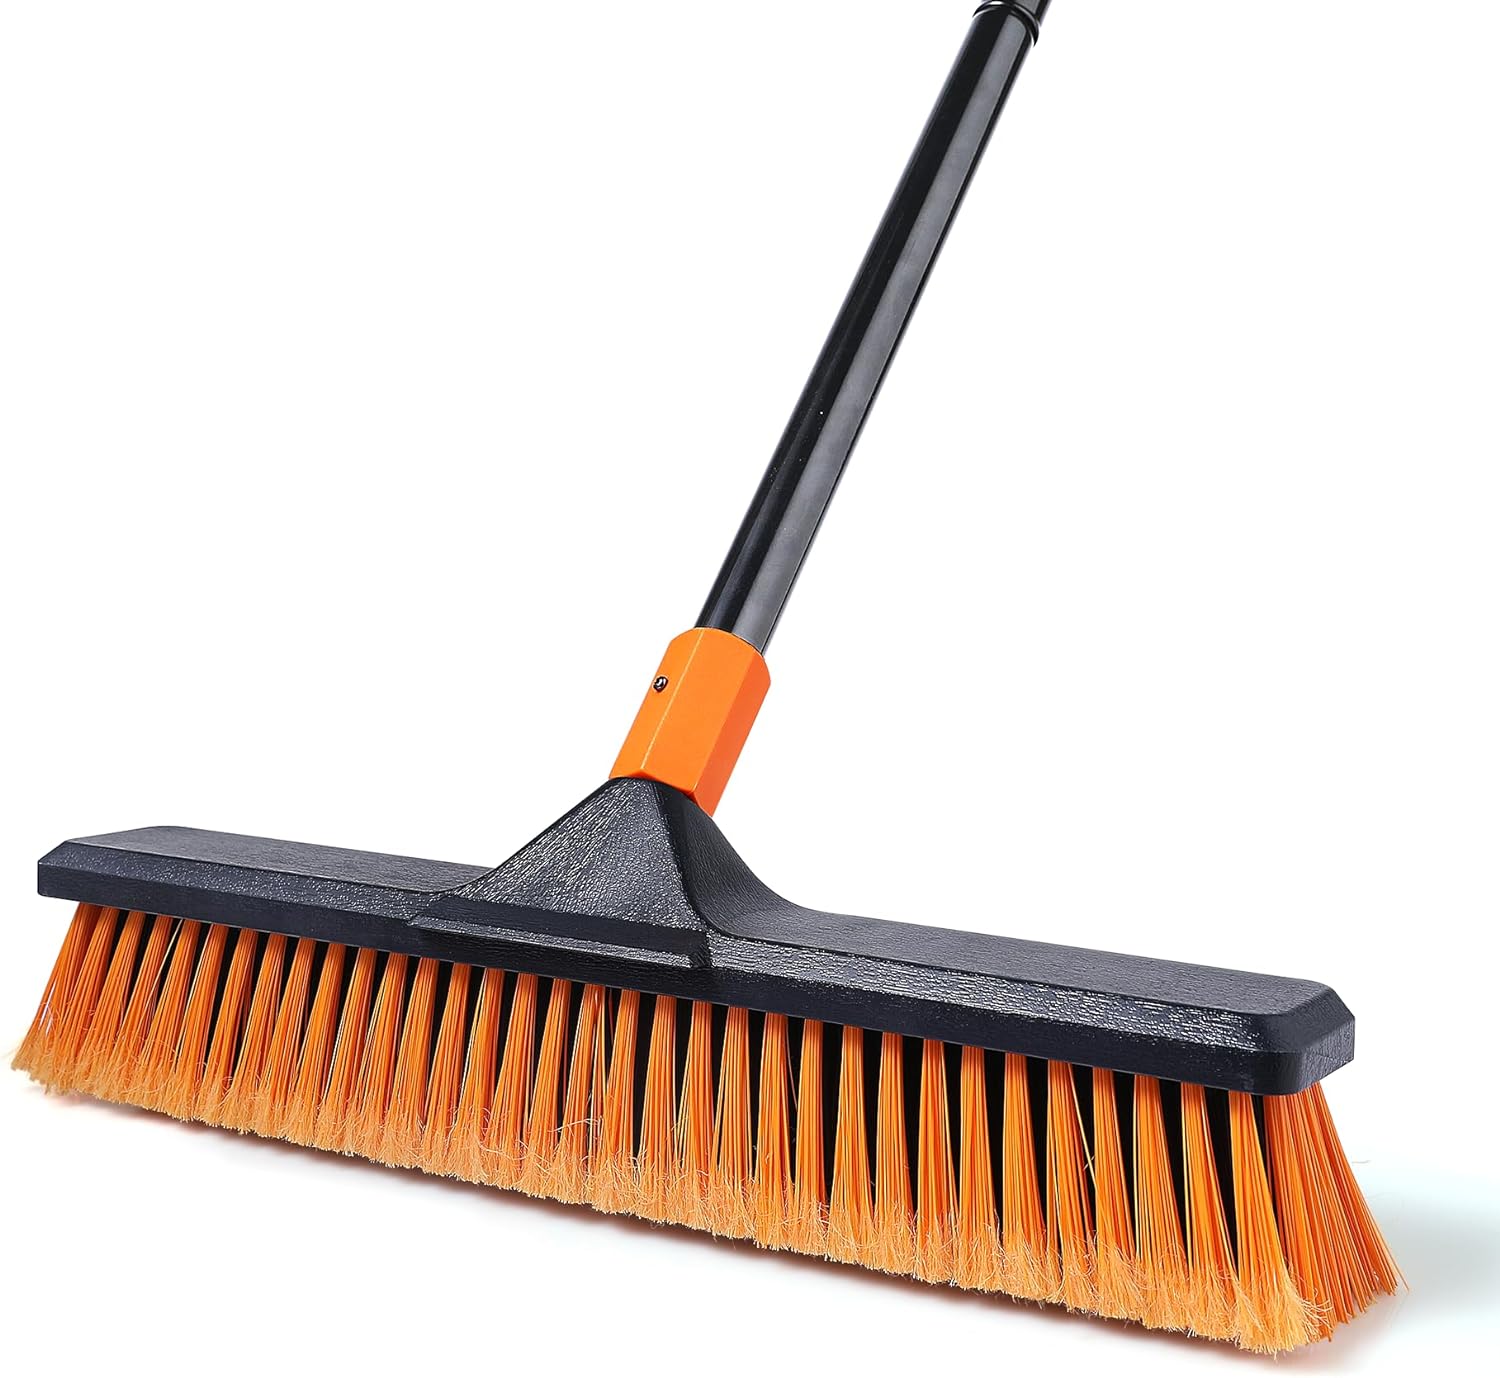 CleanHome 18″ Push Broom Review